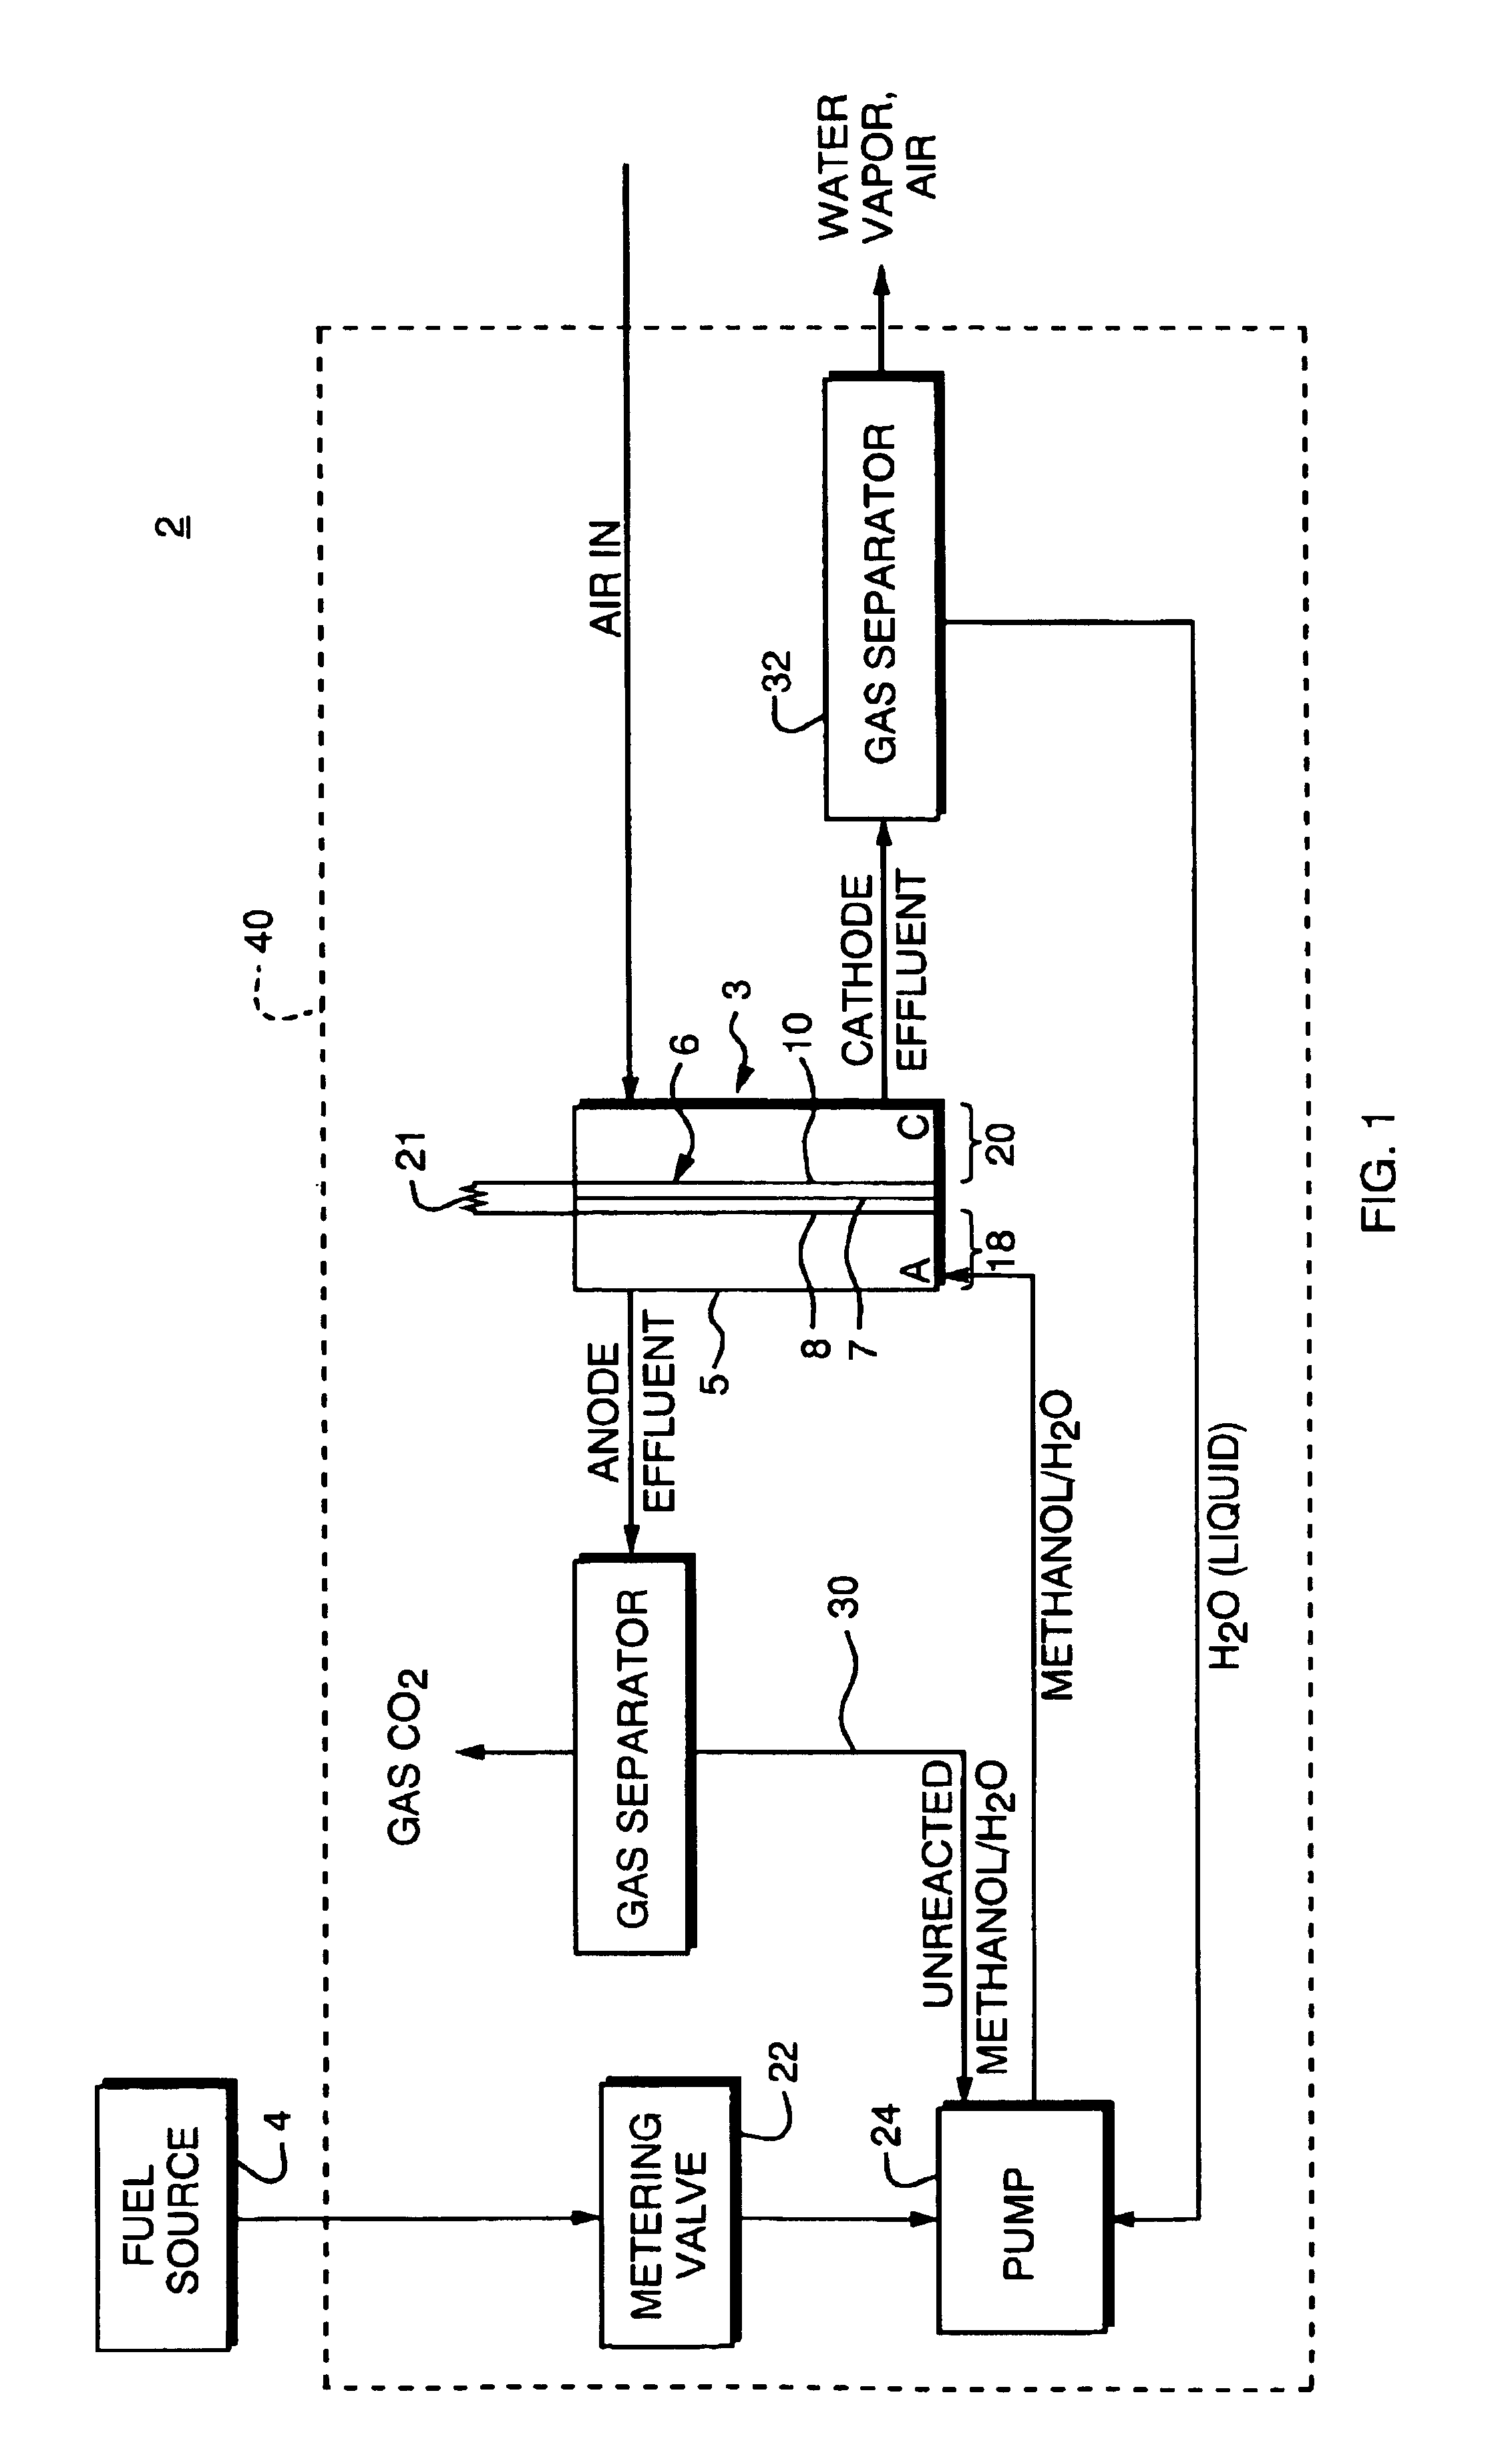 Enclosed fuel cell system and related method